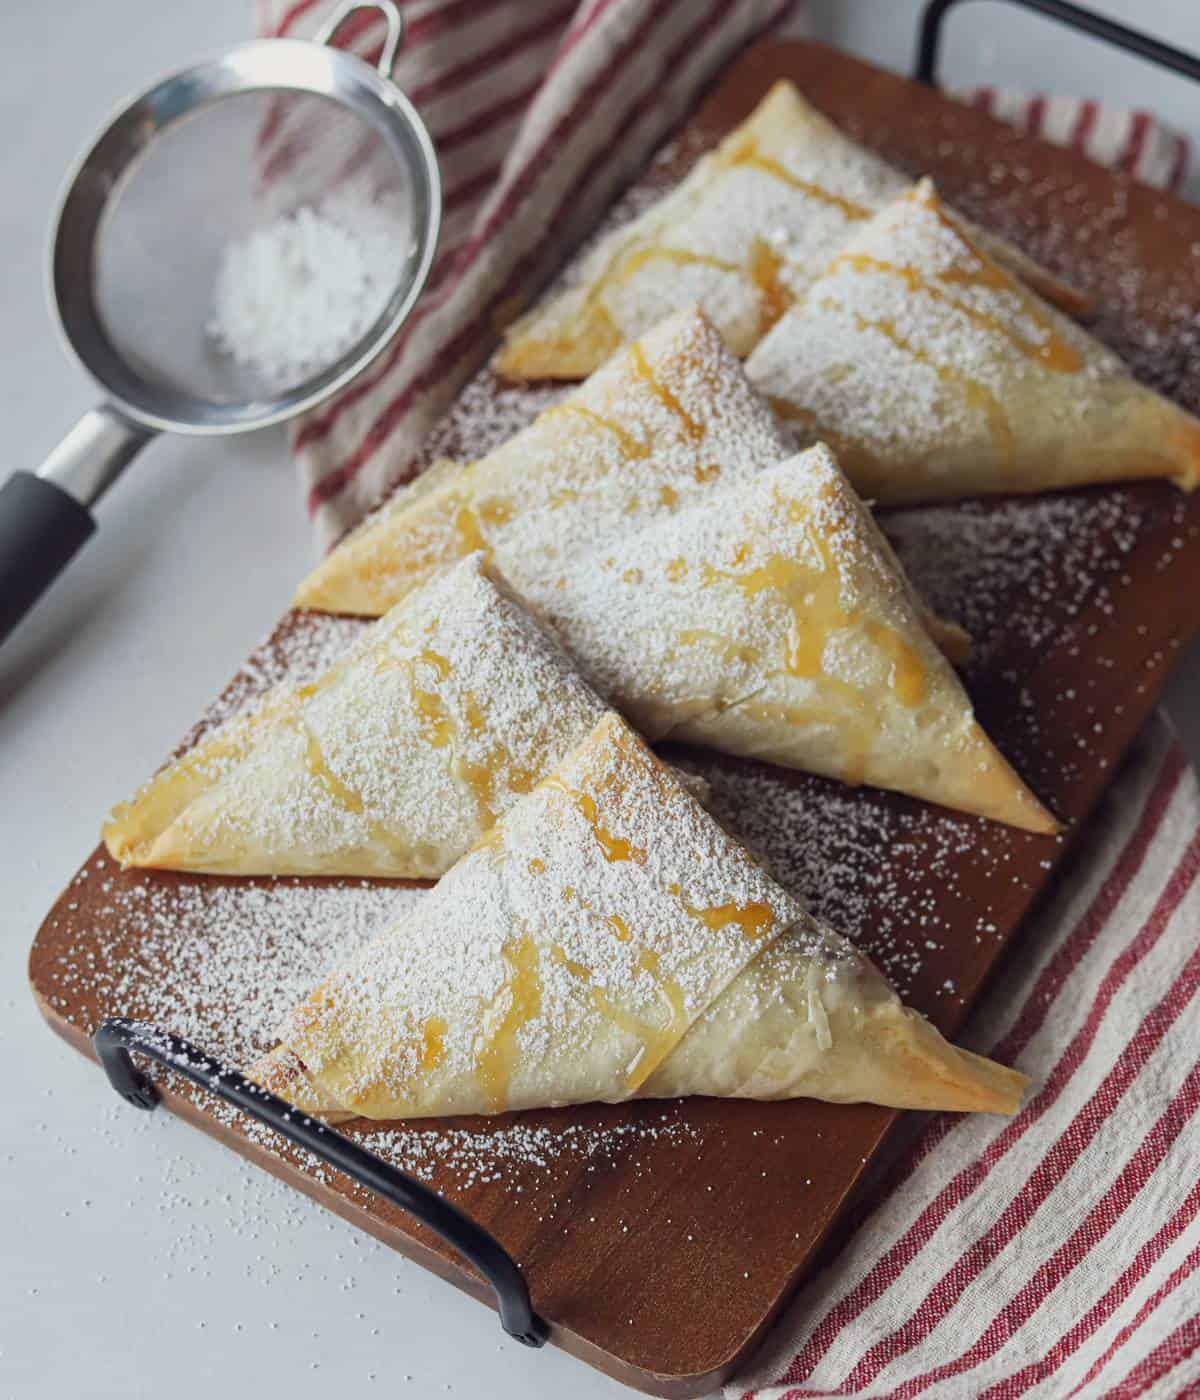 Six apple turnovers on platter with powdered sugar and caramel.